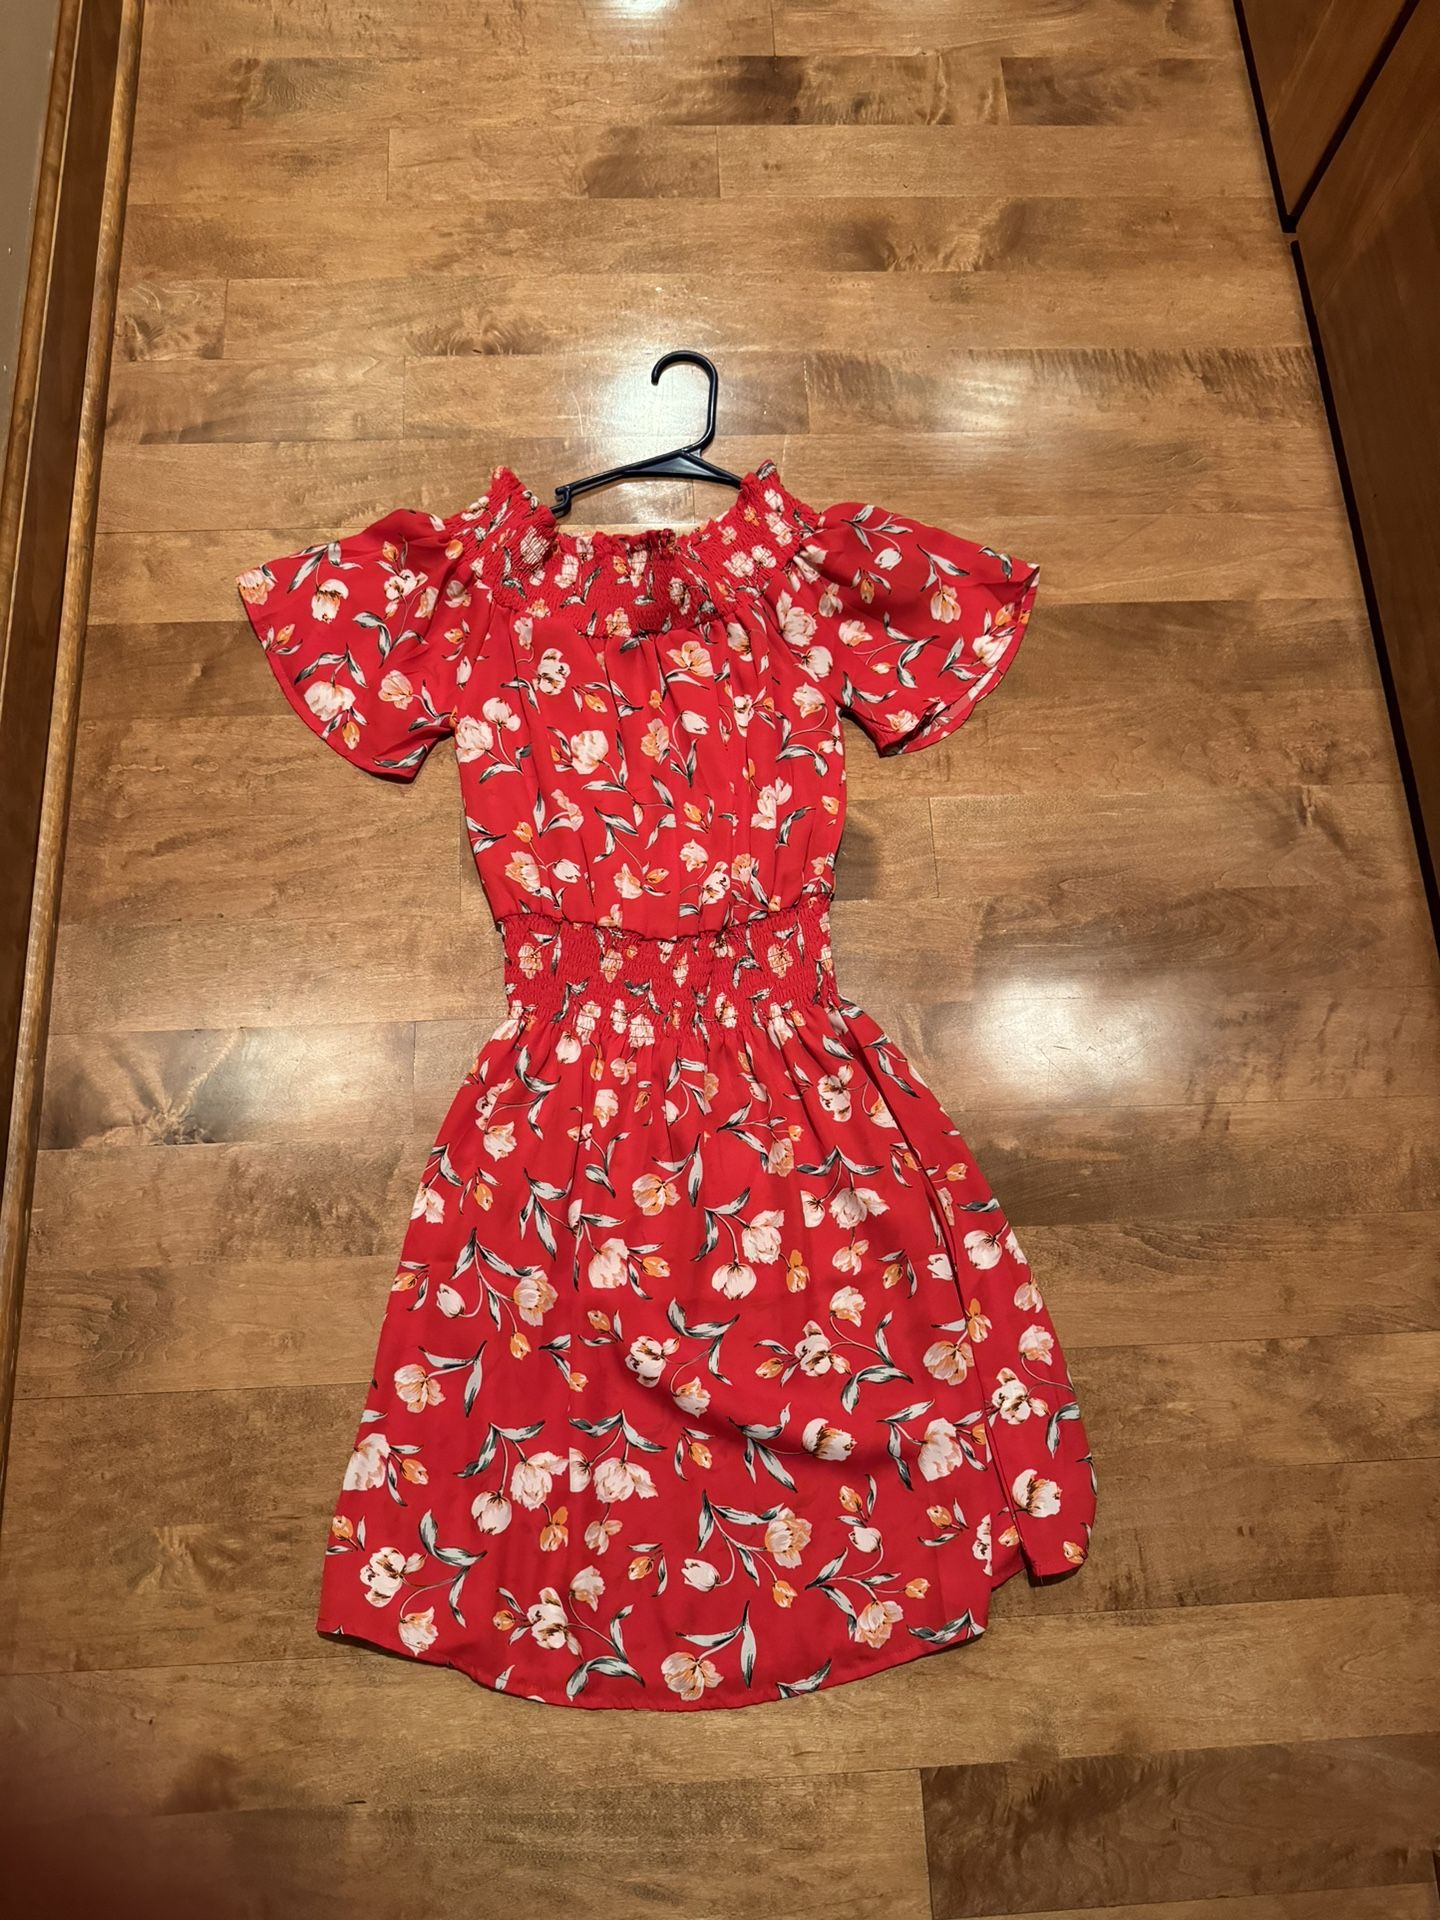 Cute Floral Woman’s Dress Shipping Available